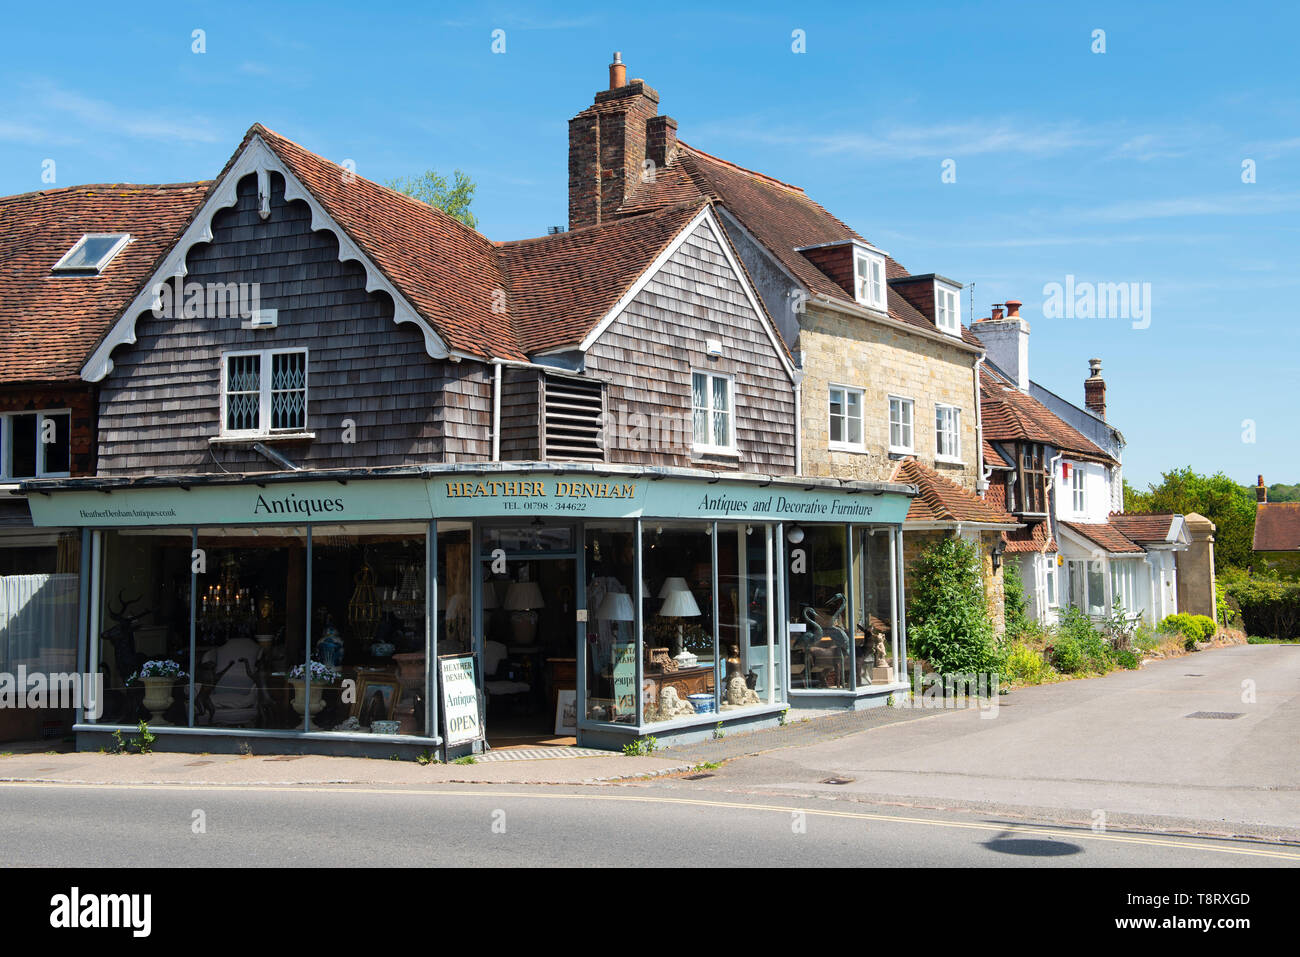 Early afternoon in mid-May in the market town of Petworth, West Sussex, England, UK Stock Photo